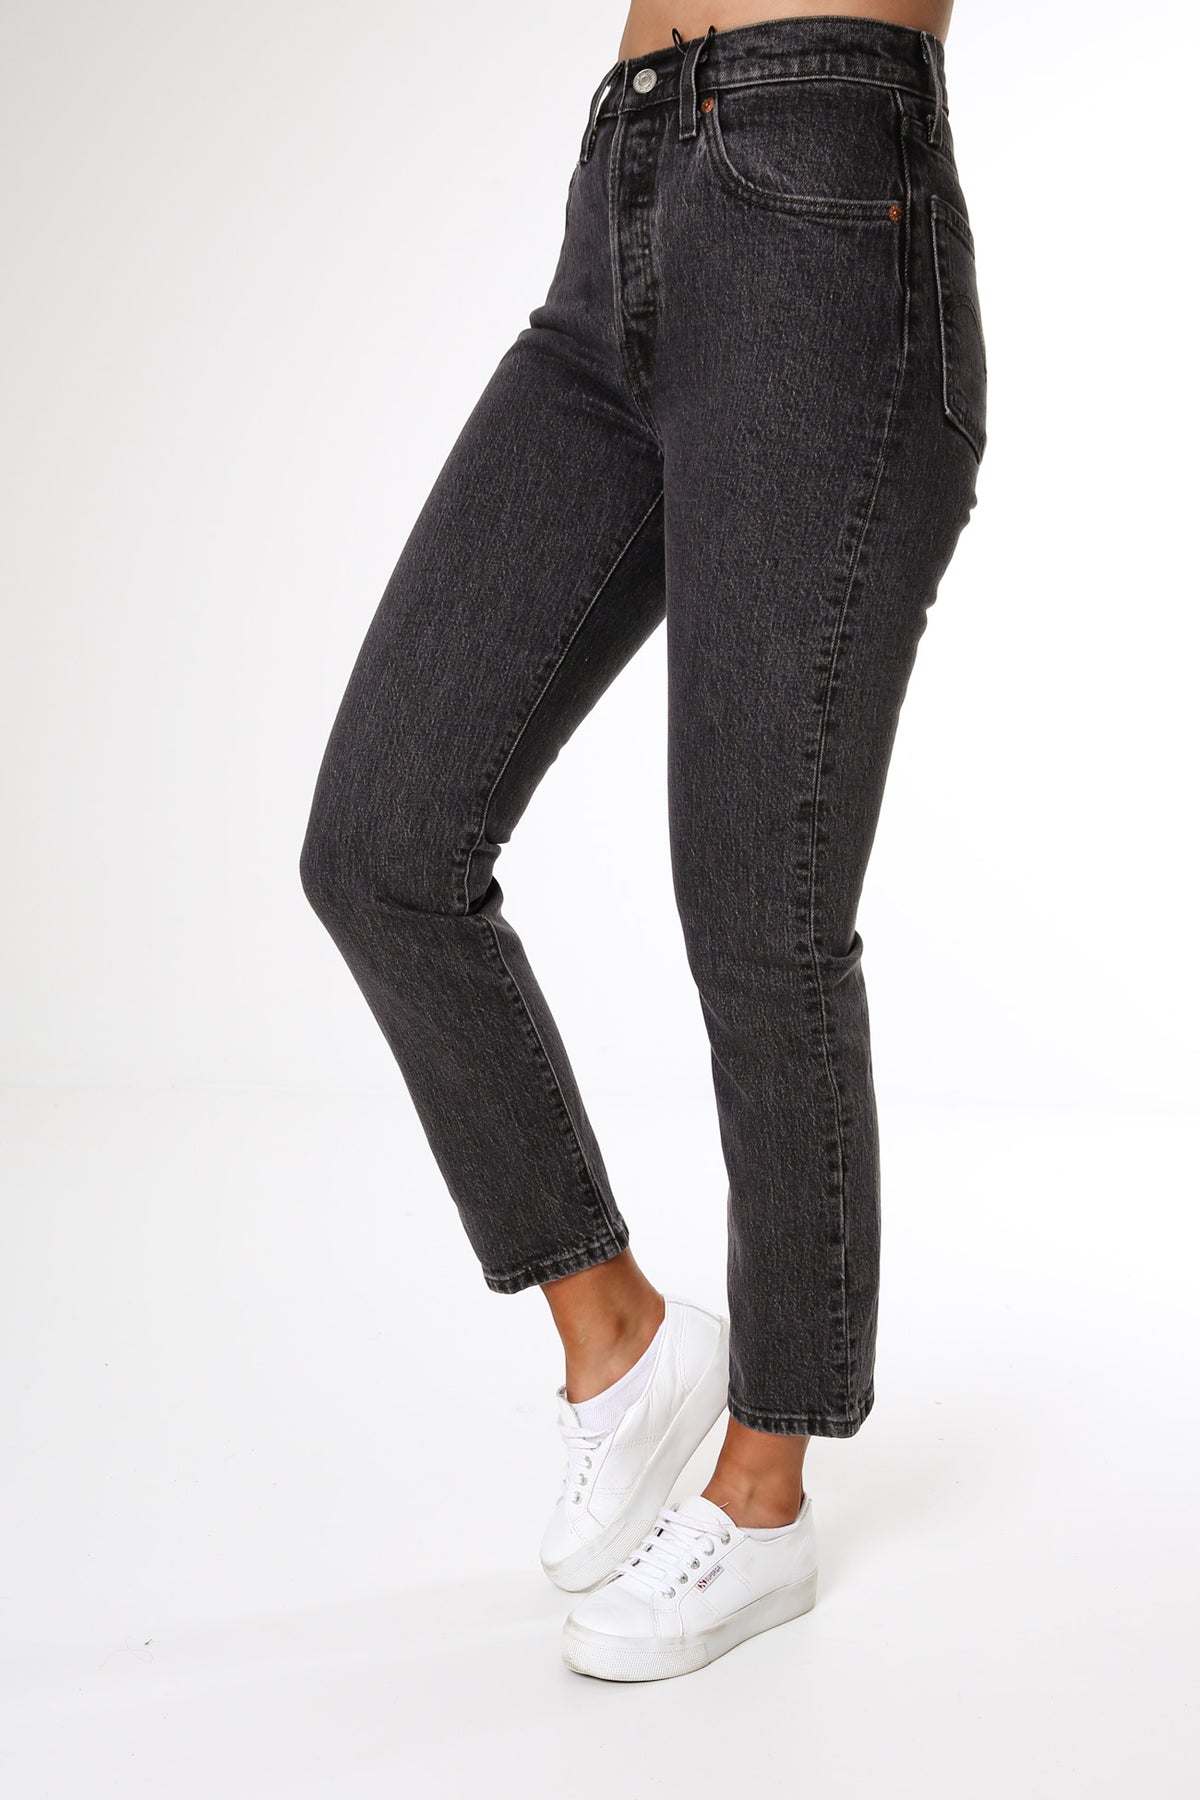 501 Original Cropped Jeans Cabo Fade - Jean Jail